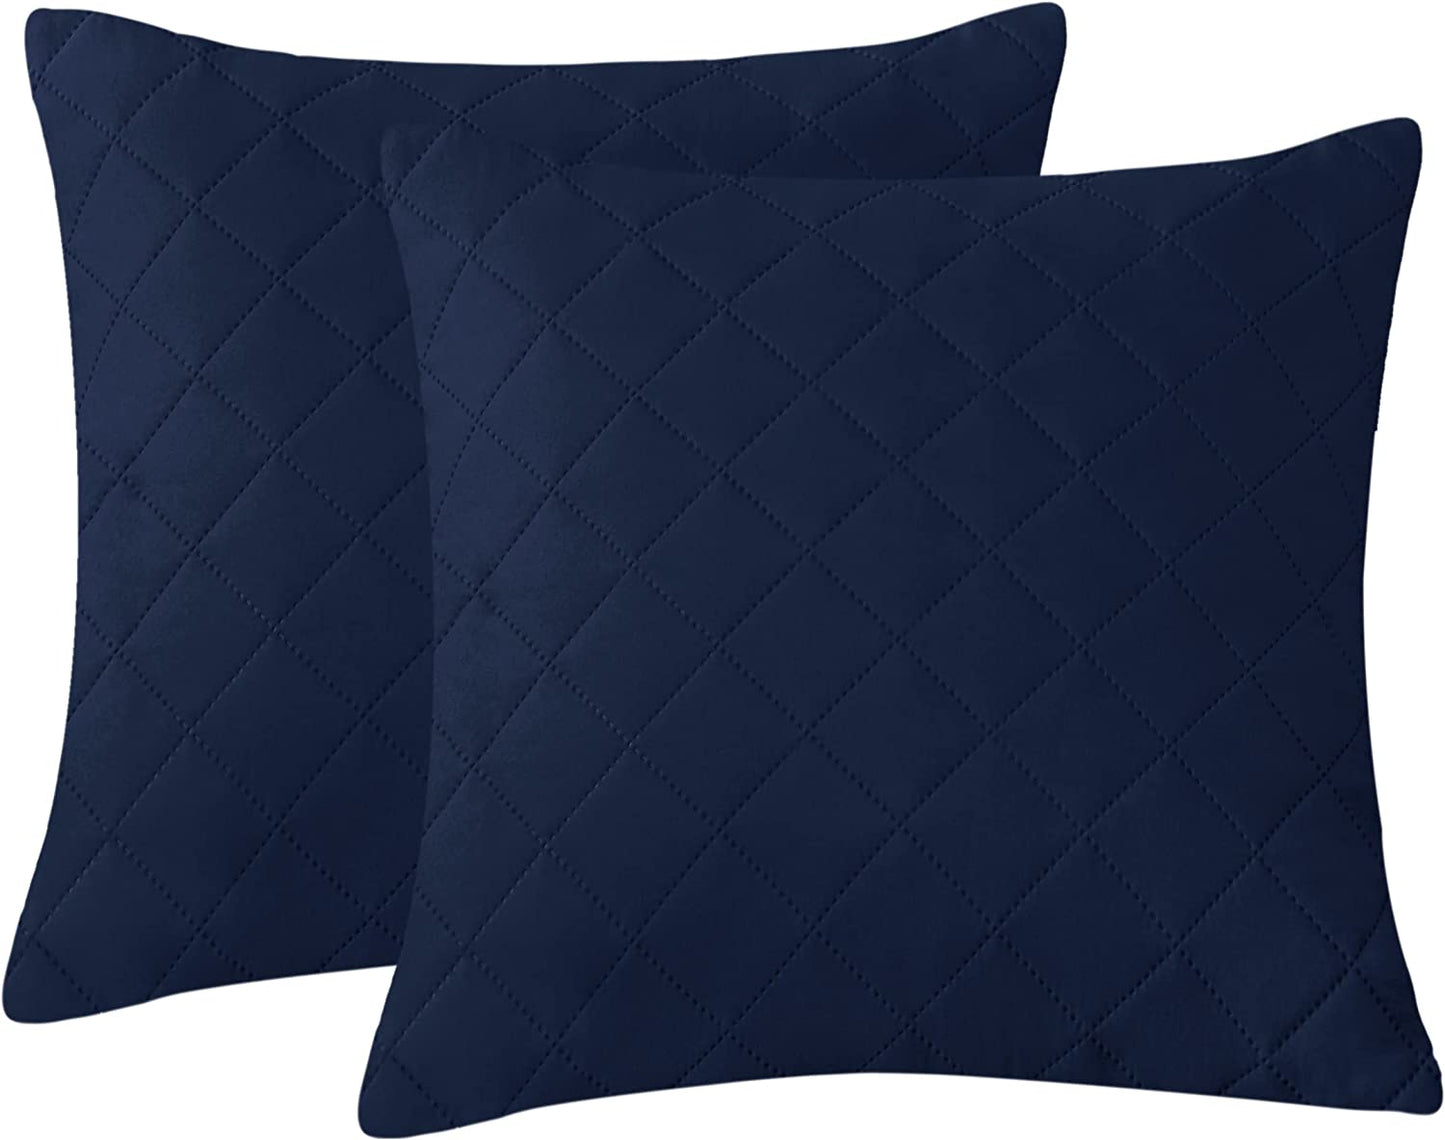 Quilted Cushion Cover Square Pattren 16"x16"Navy Blue